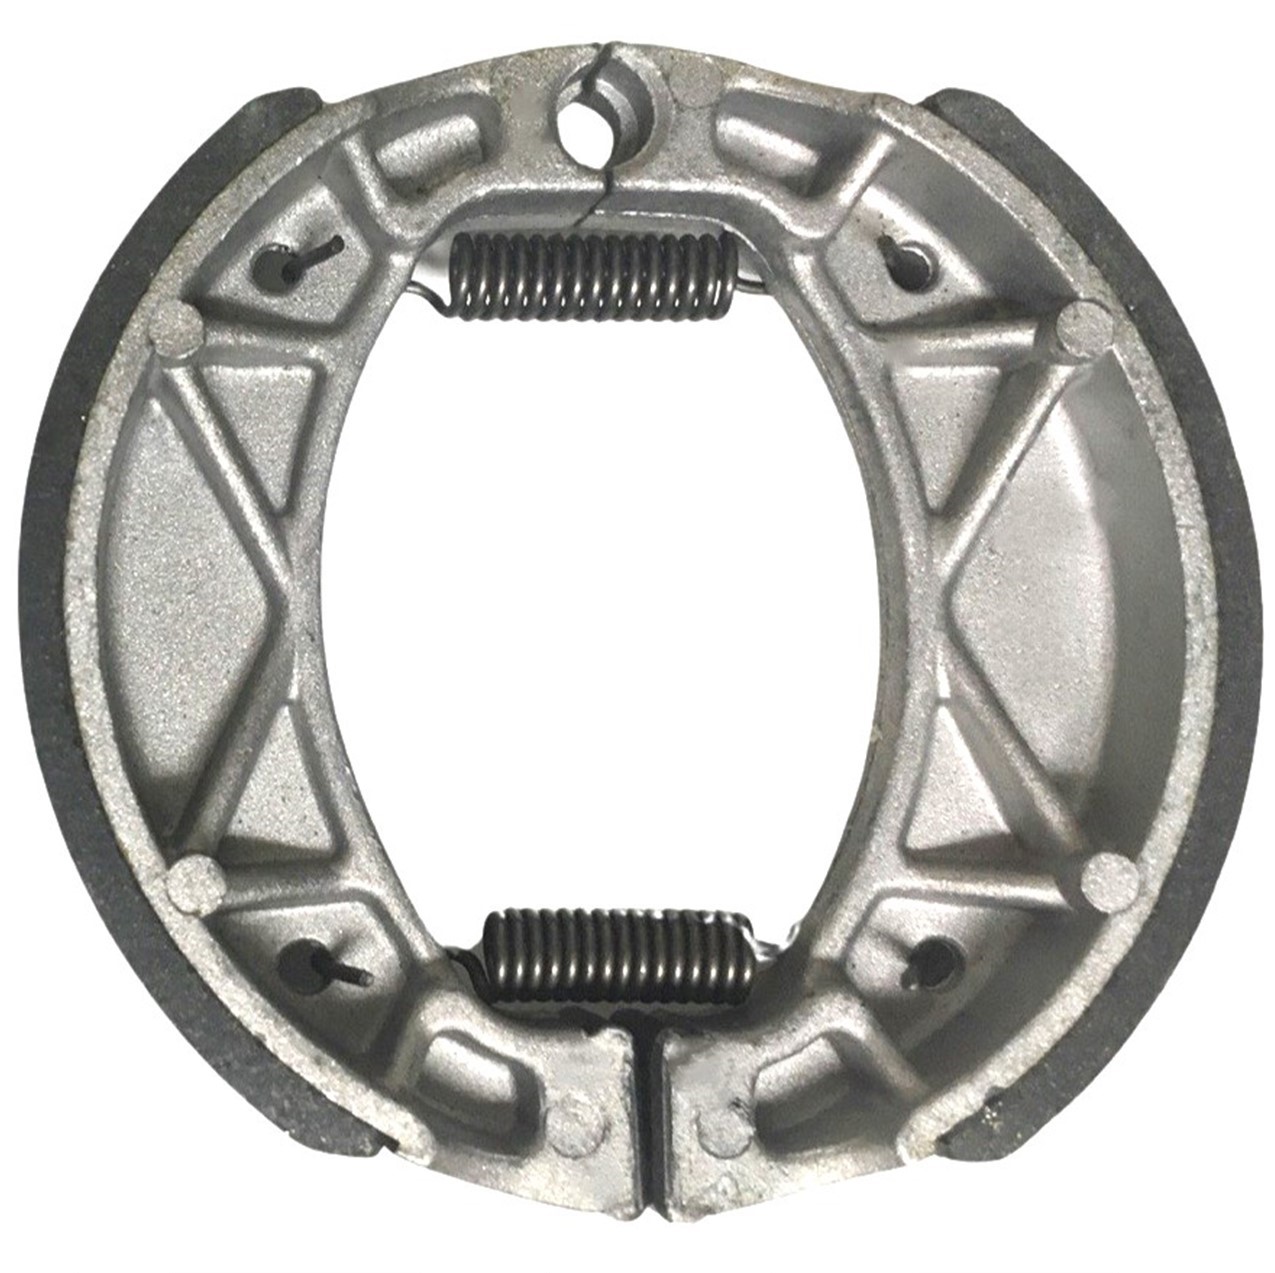 Brake Shoes OD=105x25mm With Locator Pin Ridge Fits E-Ton Beamer + other ATVs and Scooters